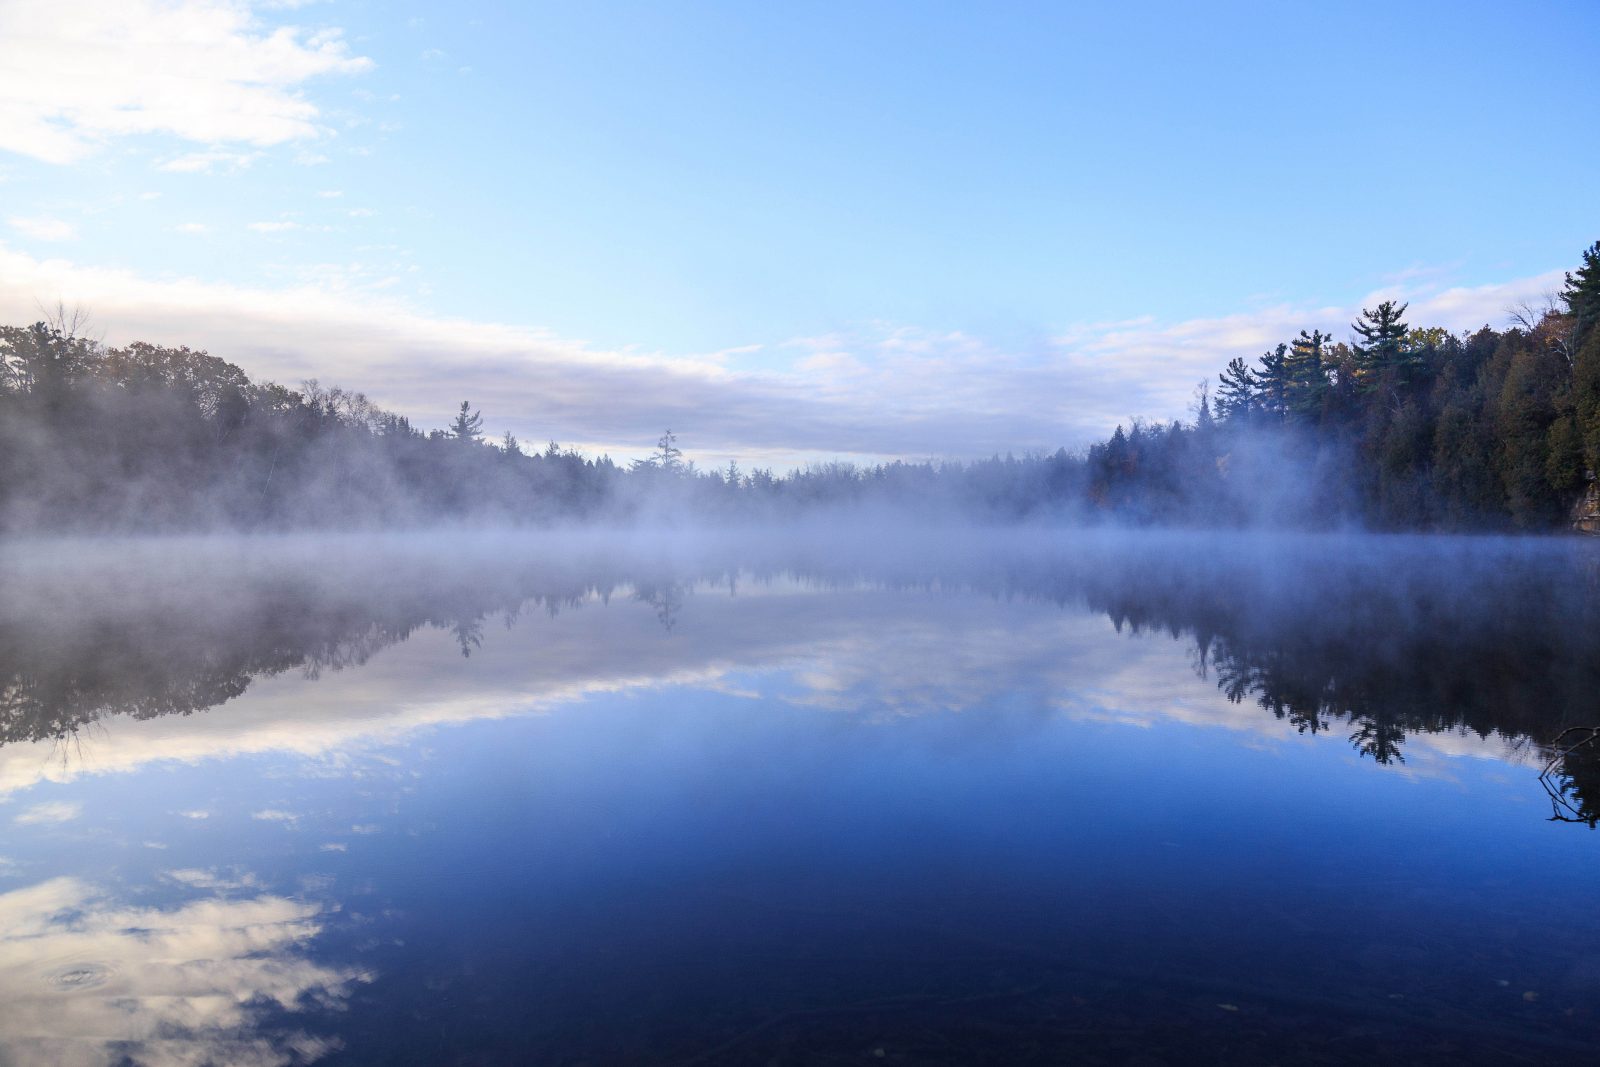 Fog rising over a lake with a treeline and blue sky in the background